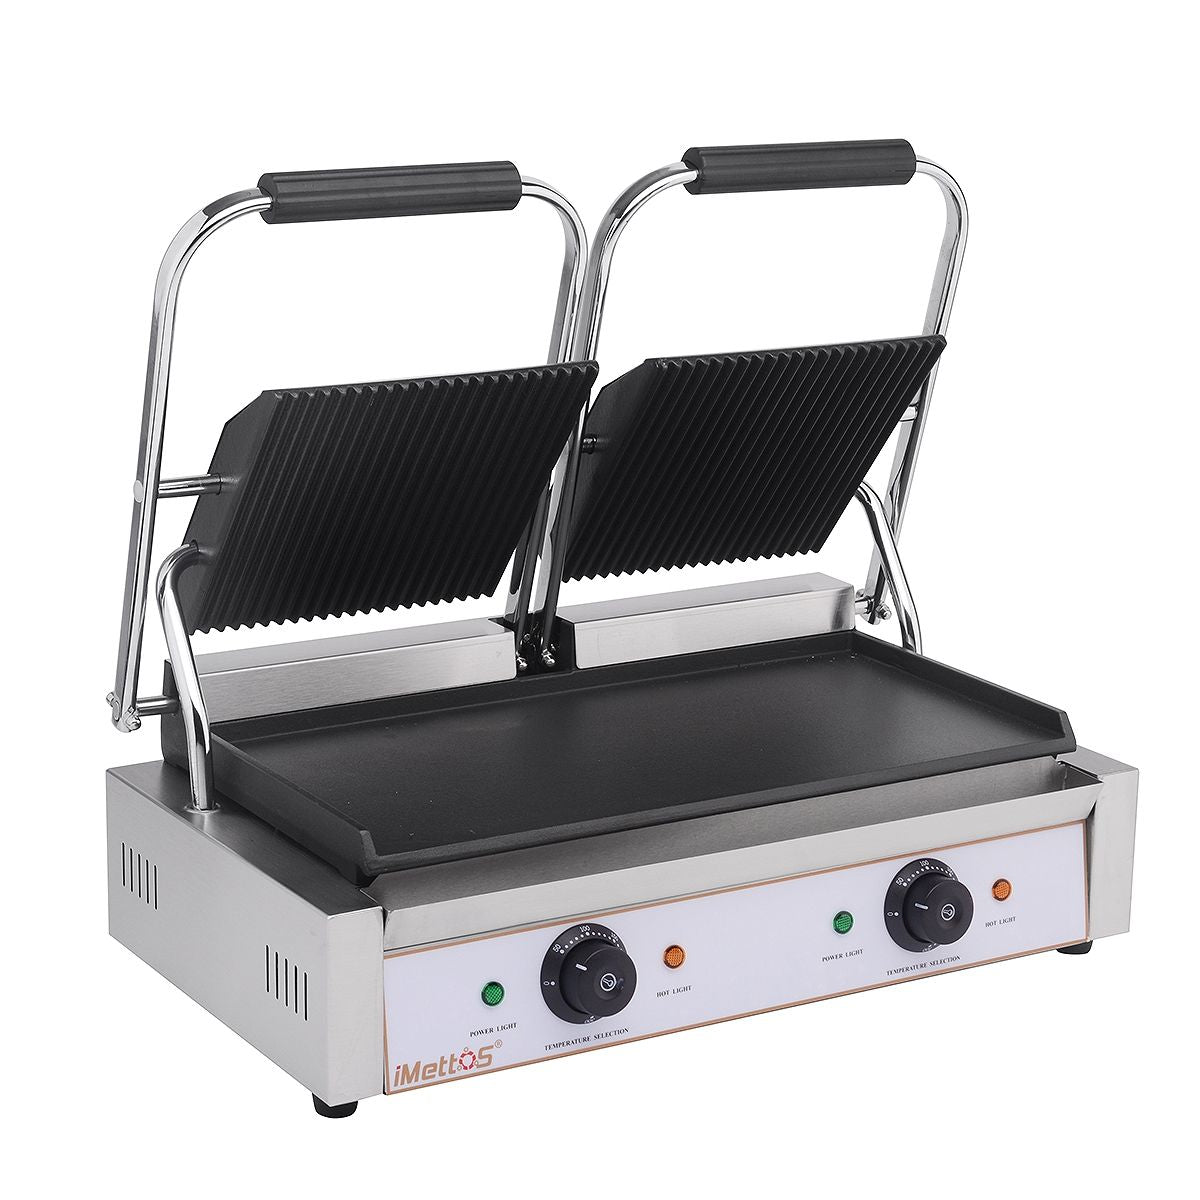 iMettos Contact Grill Twin / Ribbed Top & Smooth Bottom  - 101019 Contact Grills & Panini Makers iMettos   